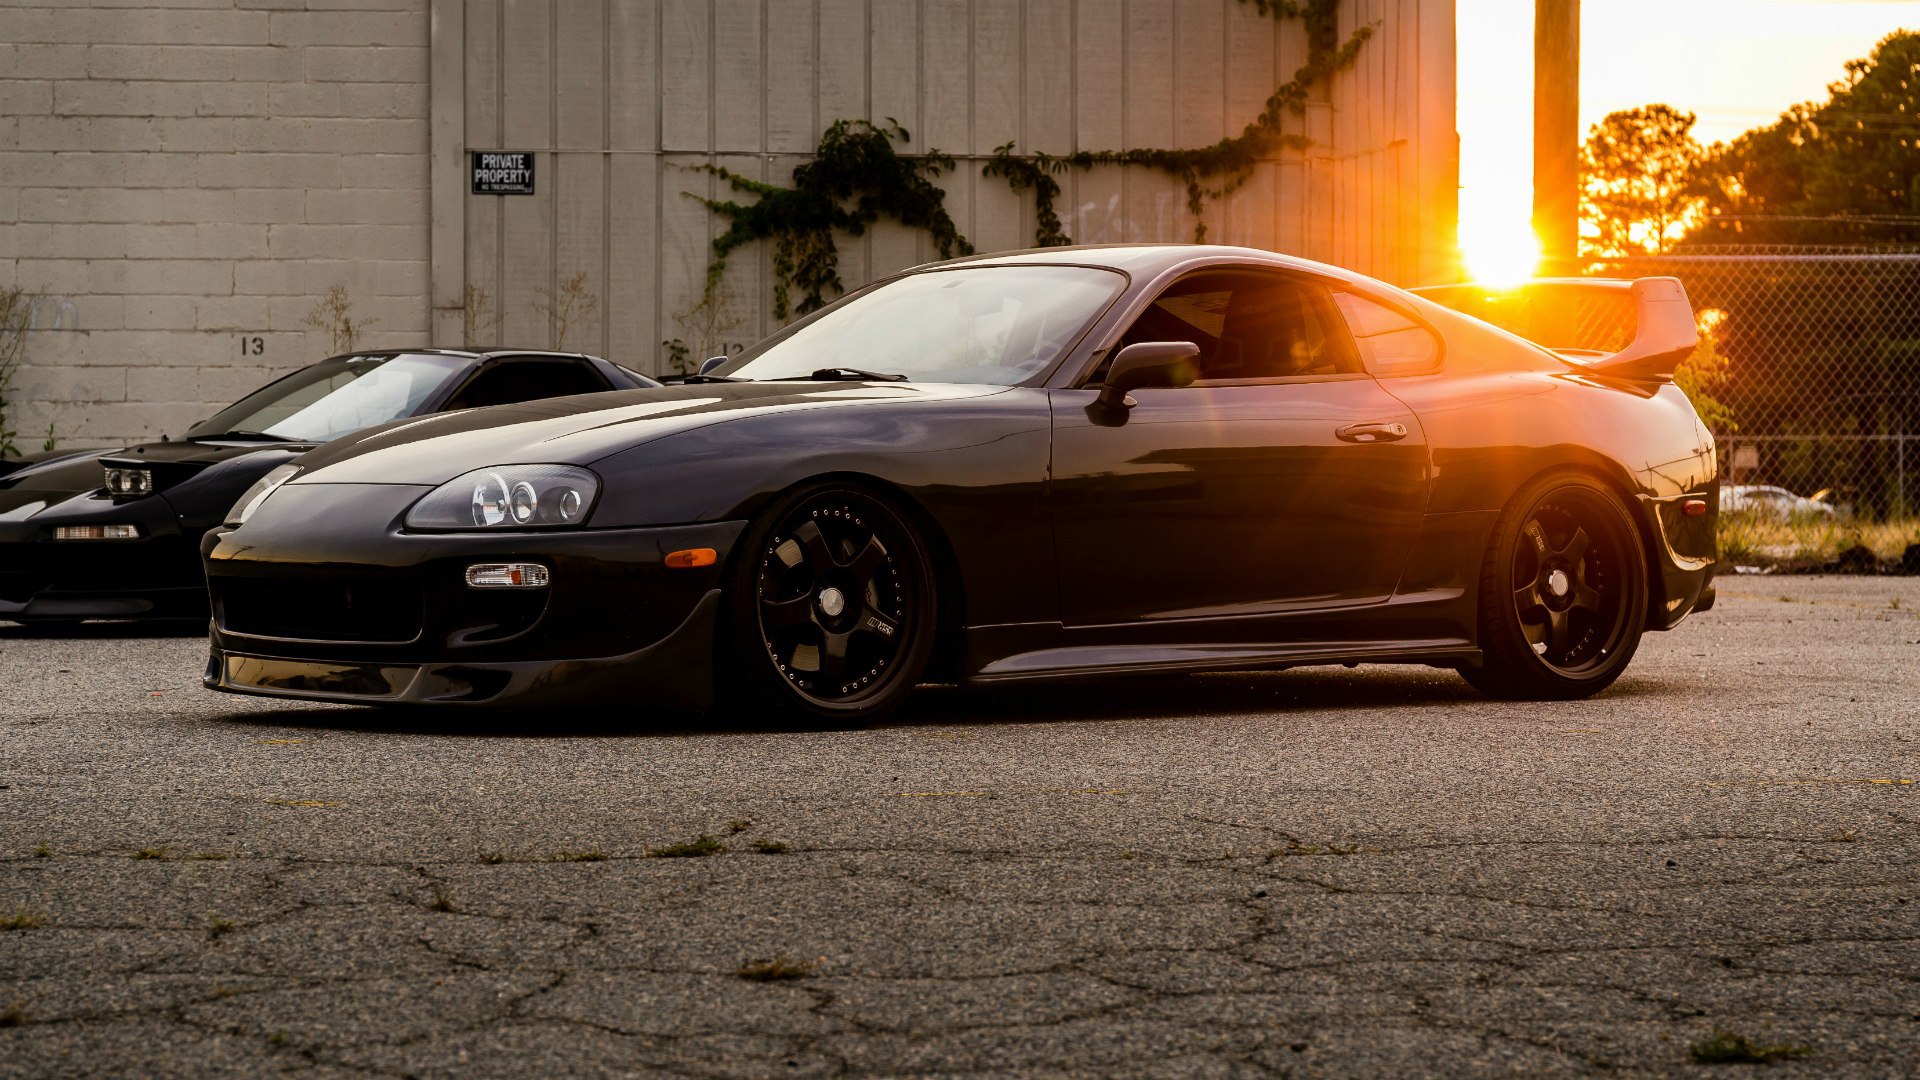 Black Toyota Supra at sunset wallpapers and images - wallpapers ...